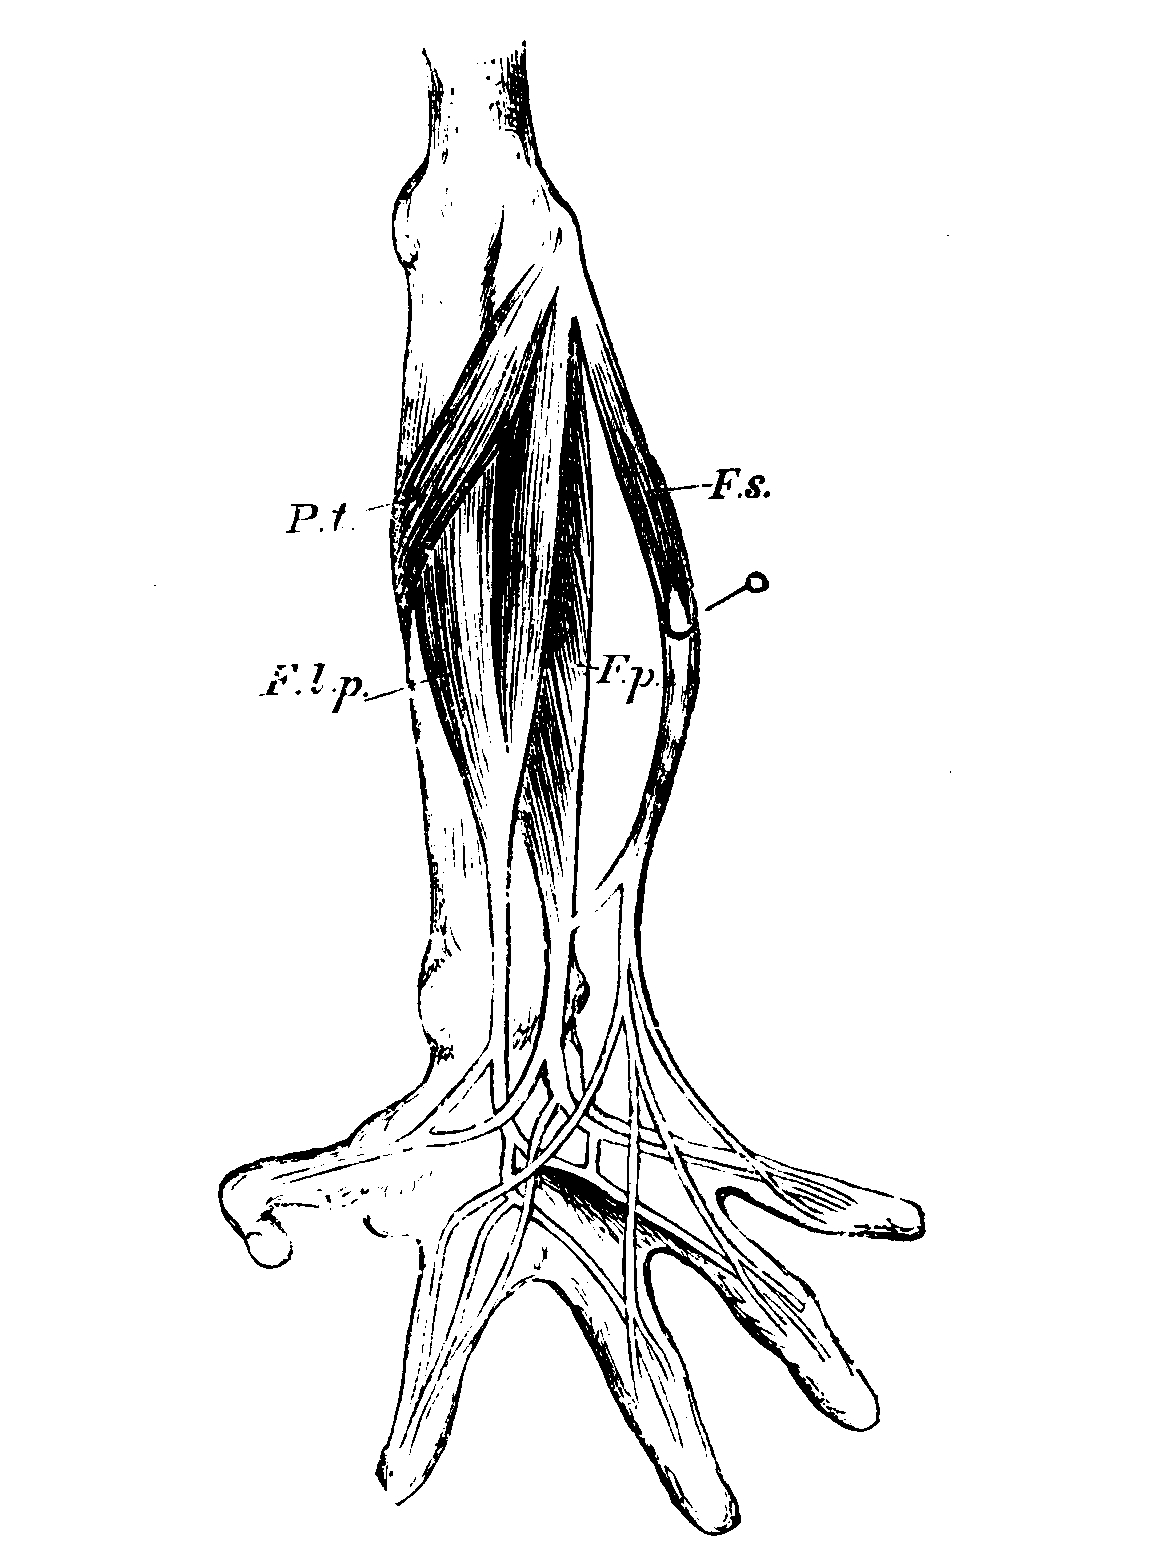 Muscles and Tendons of the Hand.